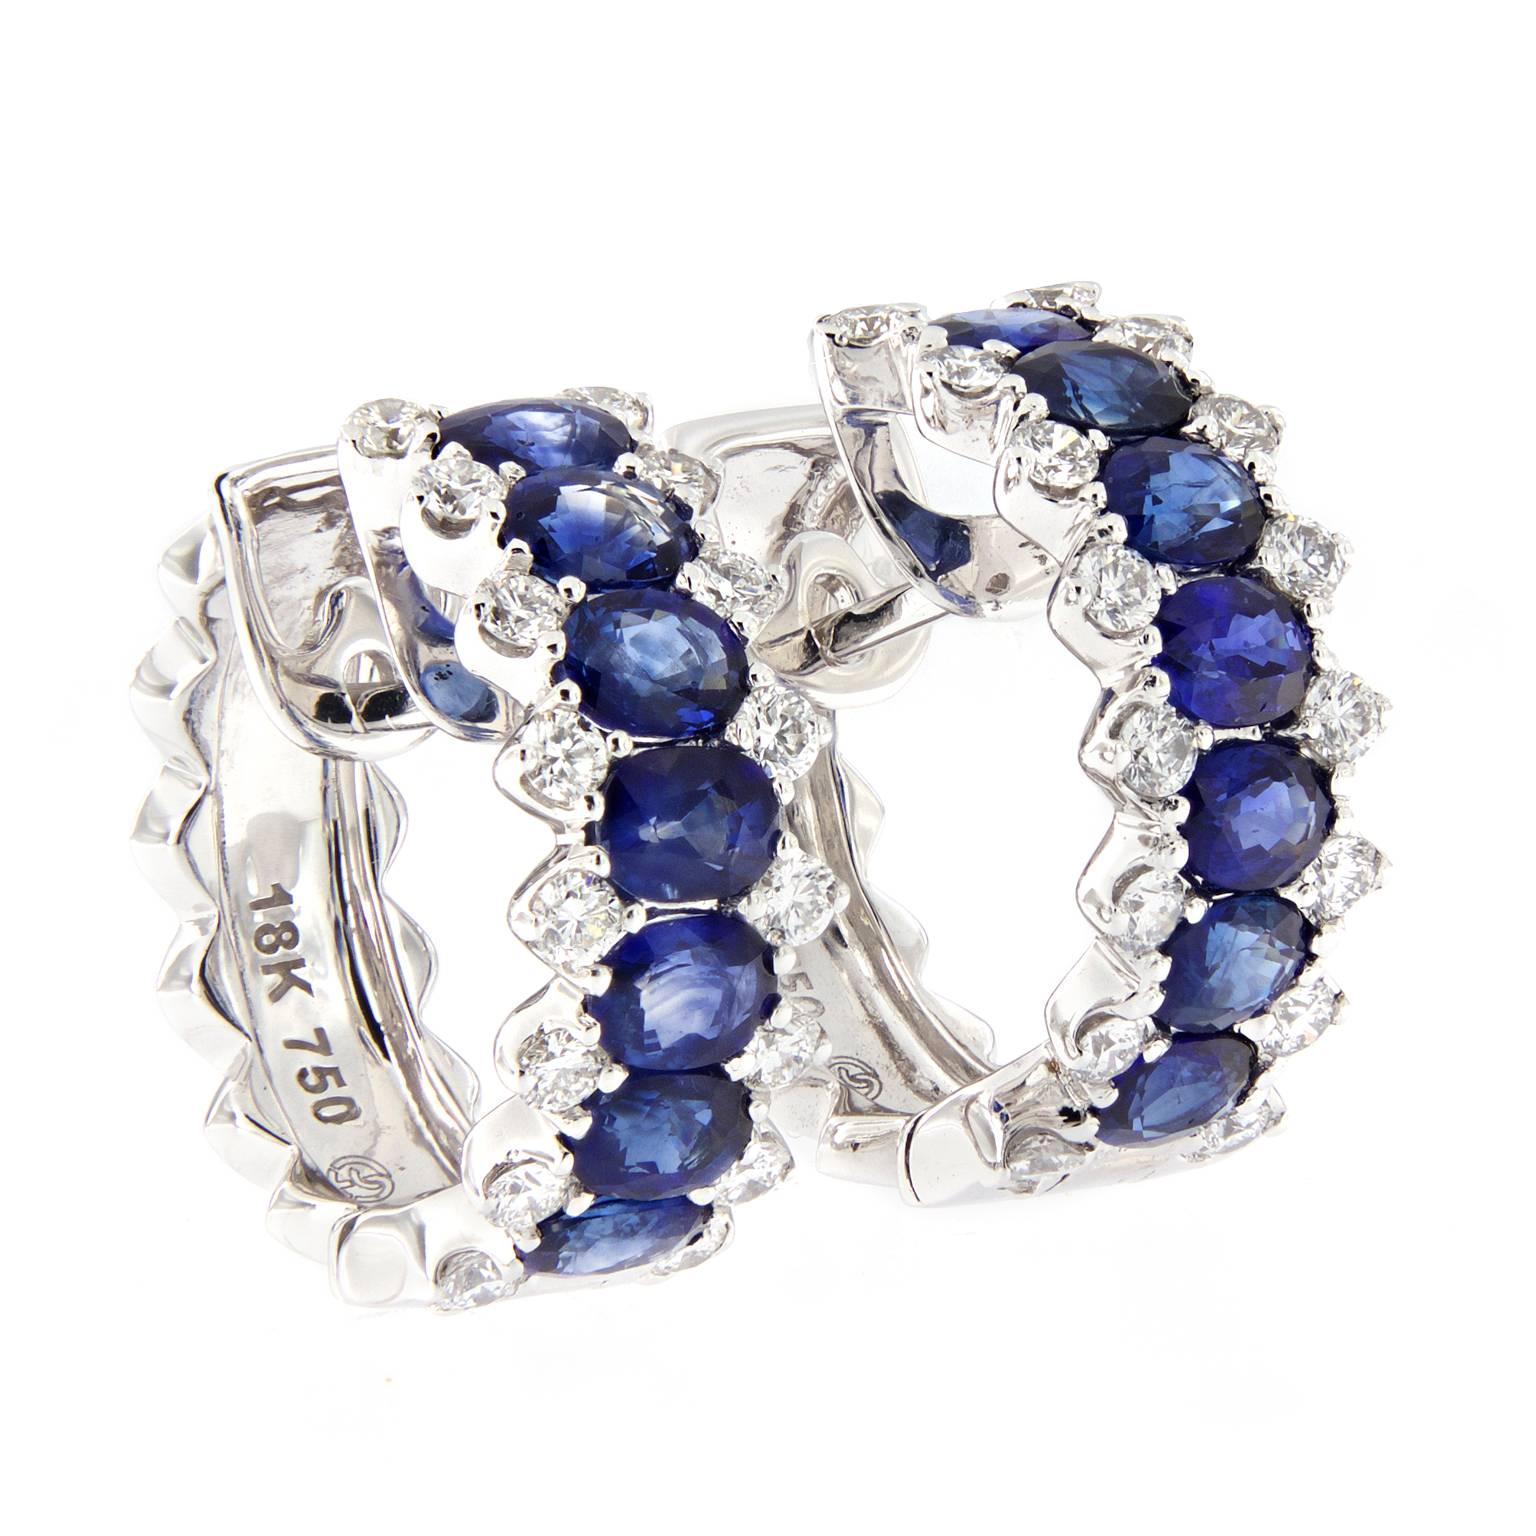 A beautiful combination of oval sapphires and diamonds create a stunning hoop earring. Earrings are crafted in 18k white gold. Weigh 12.2 grams.

Sapphires 4.43 cttw
Diamonds 1.12 cttw